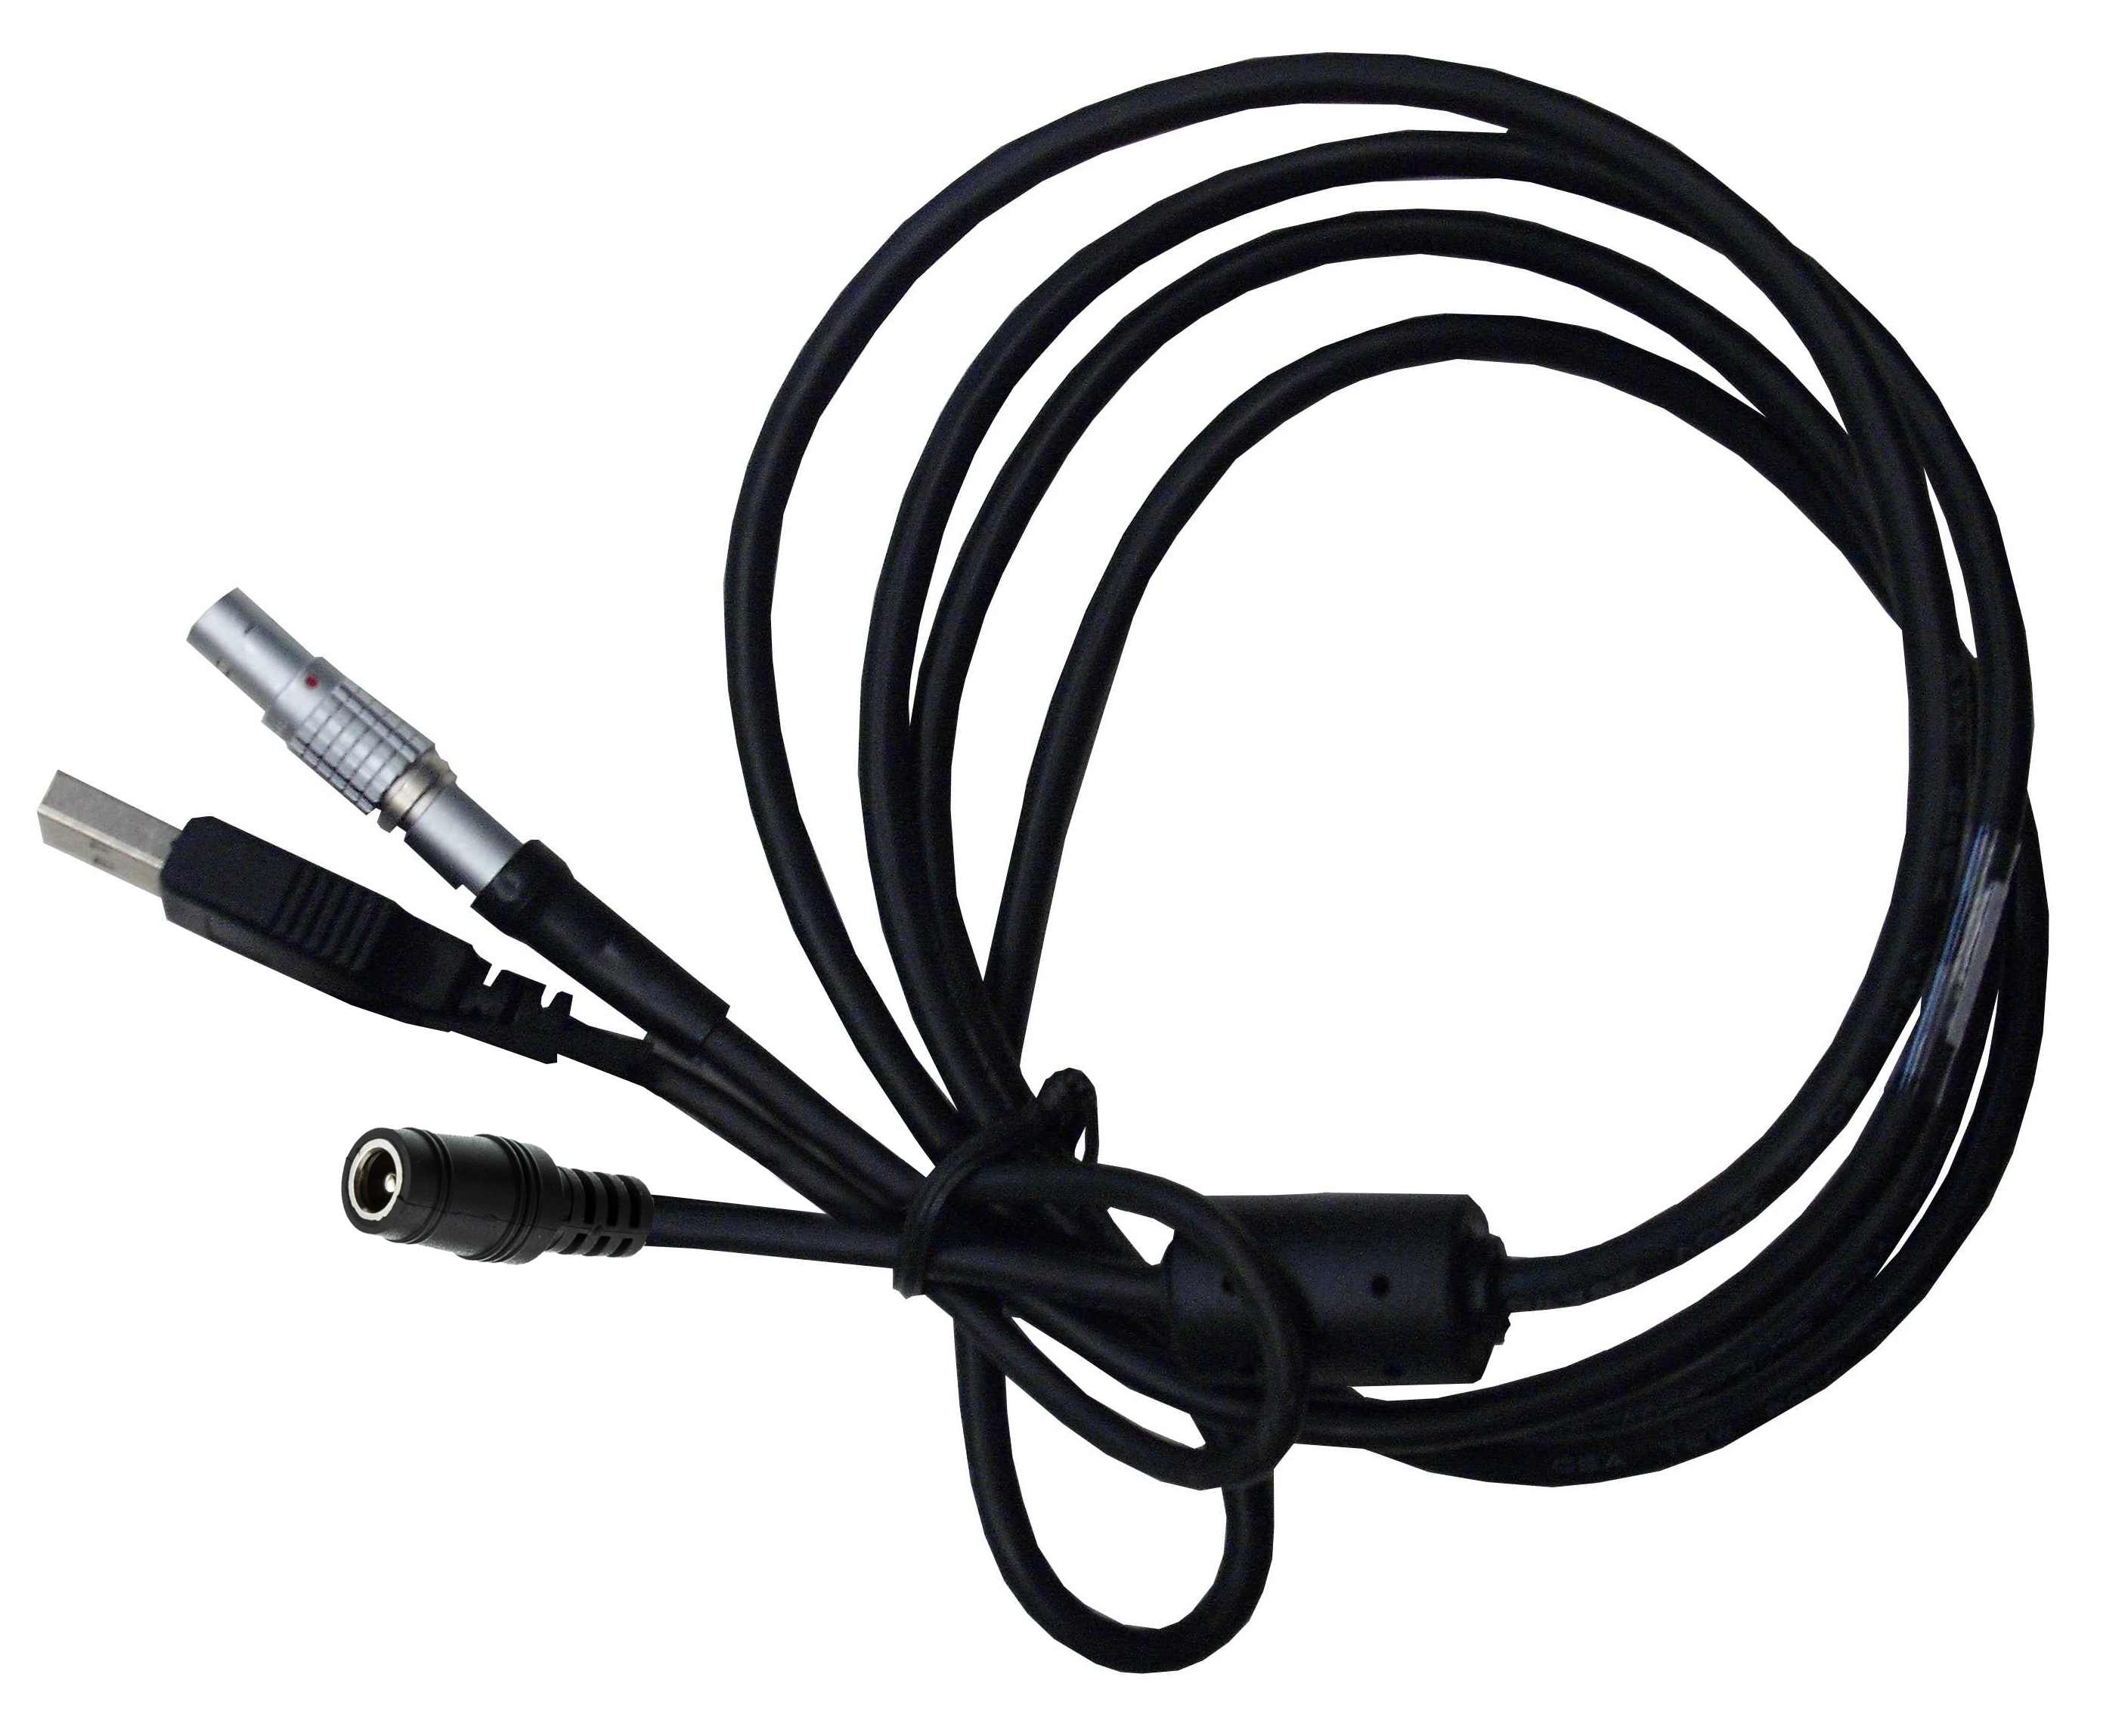 SmaRTK LEMO to USB Data / DC Power "Y" Cable 1m